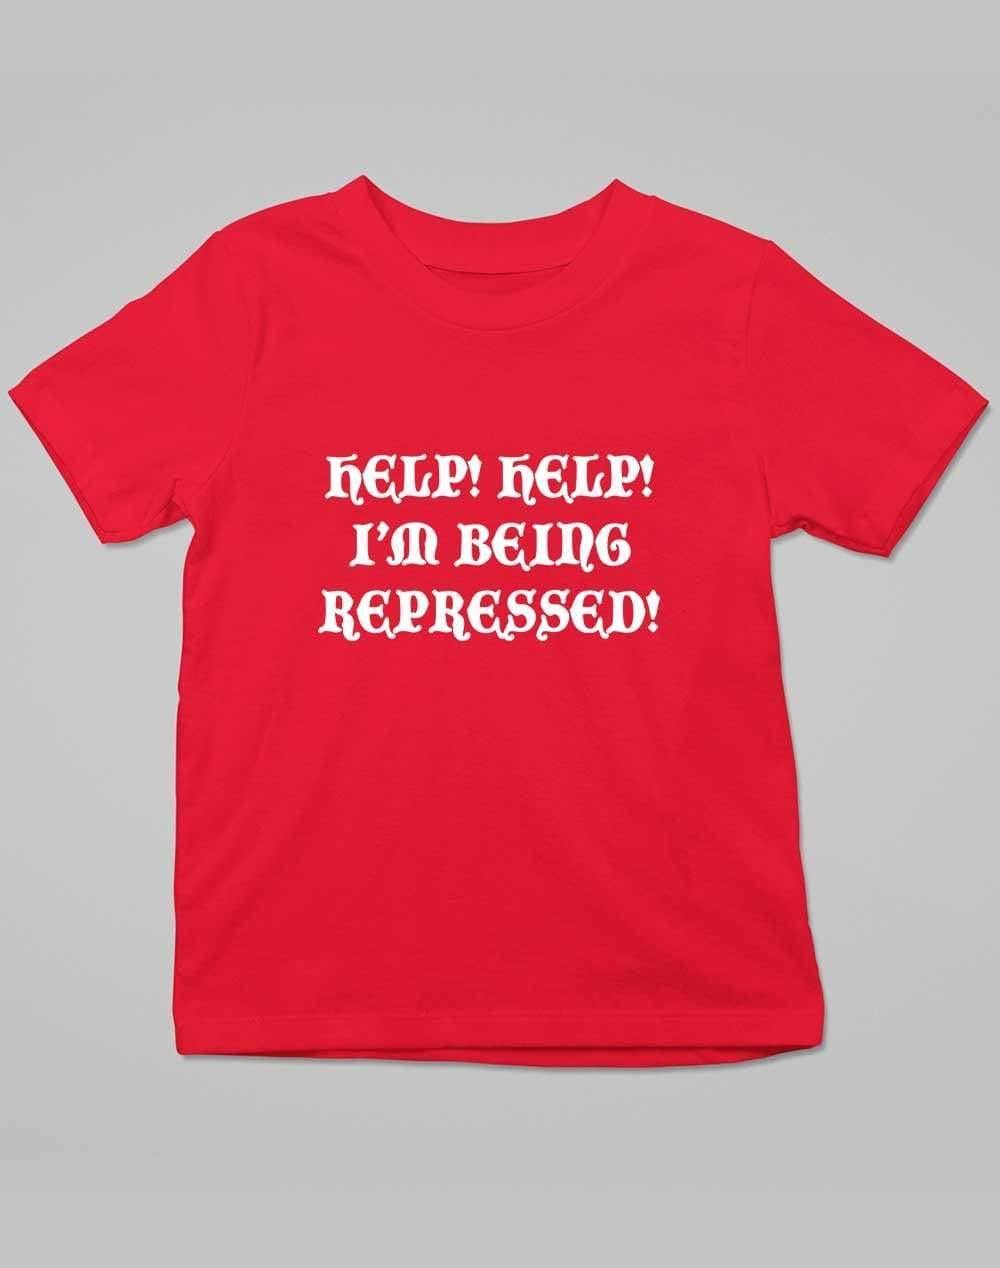 Help I'm Being Repressed Kids T-Shirt 3-4 years / Red  - Off World Tees